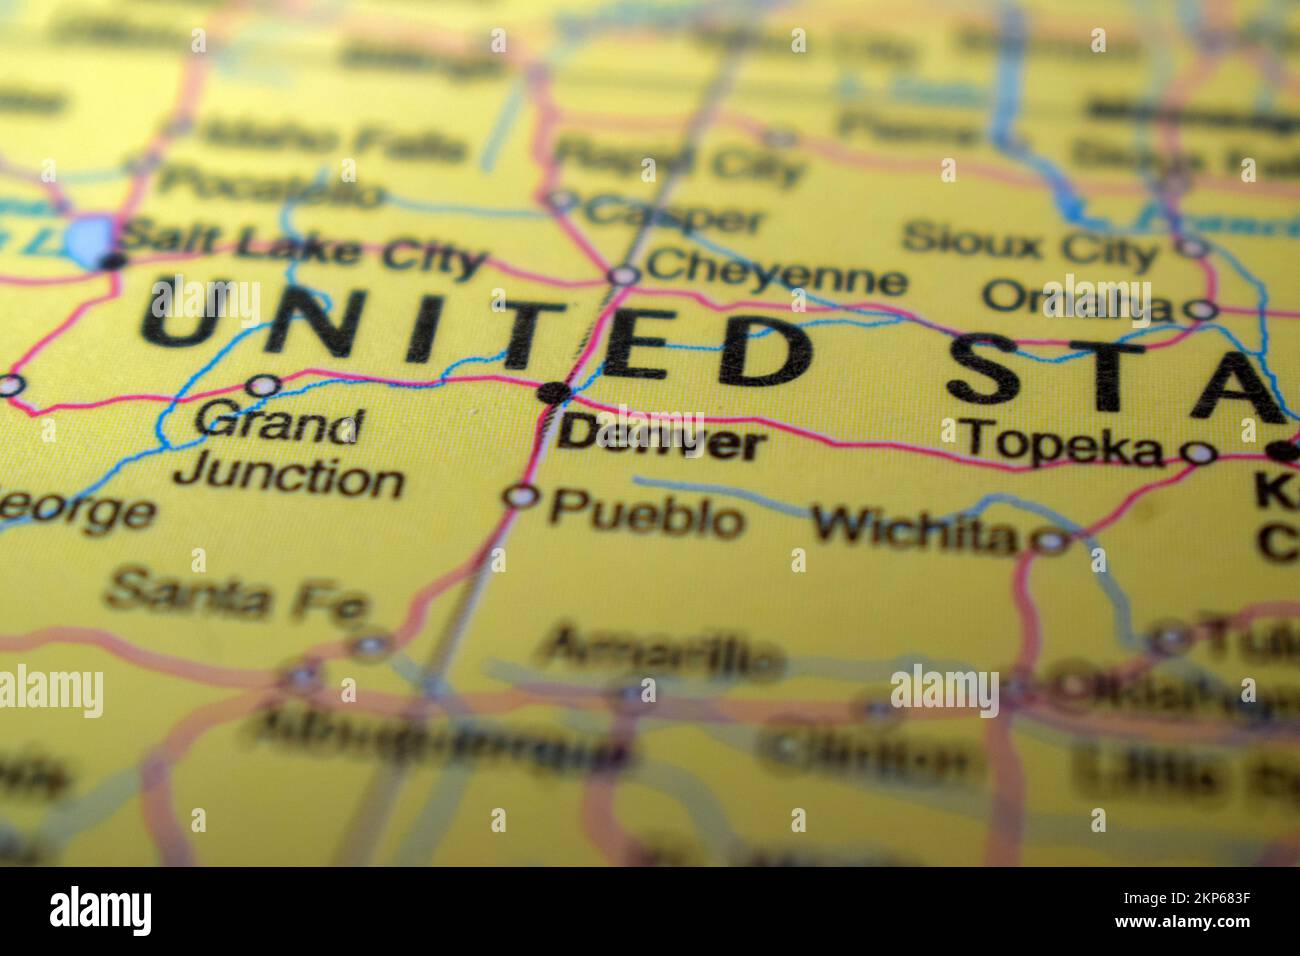 Denver on The Political Map Travel Concept Macro Close-Up View Stock Photo